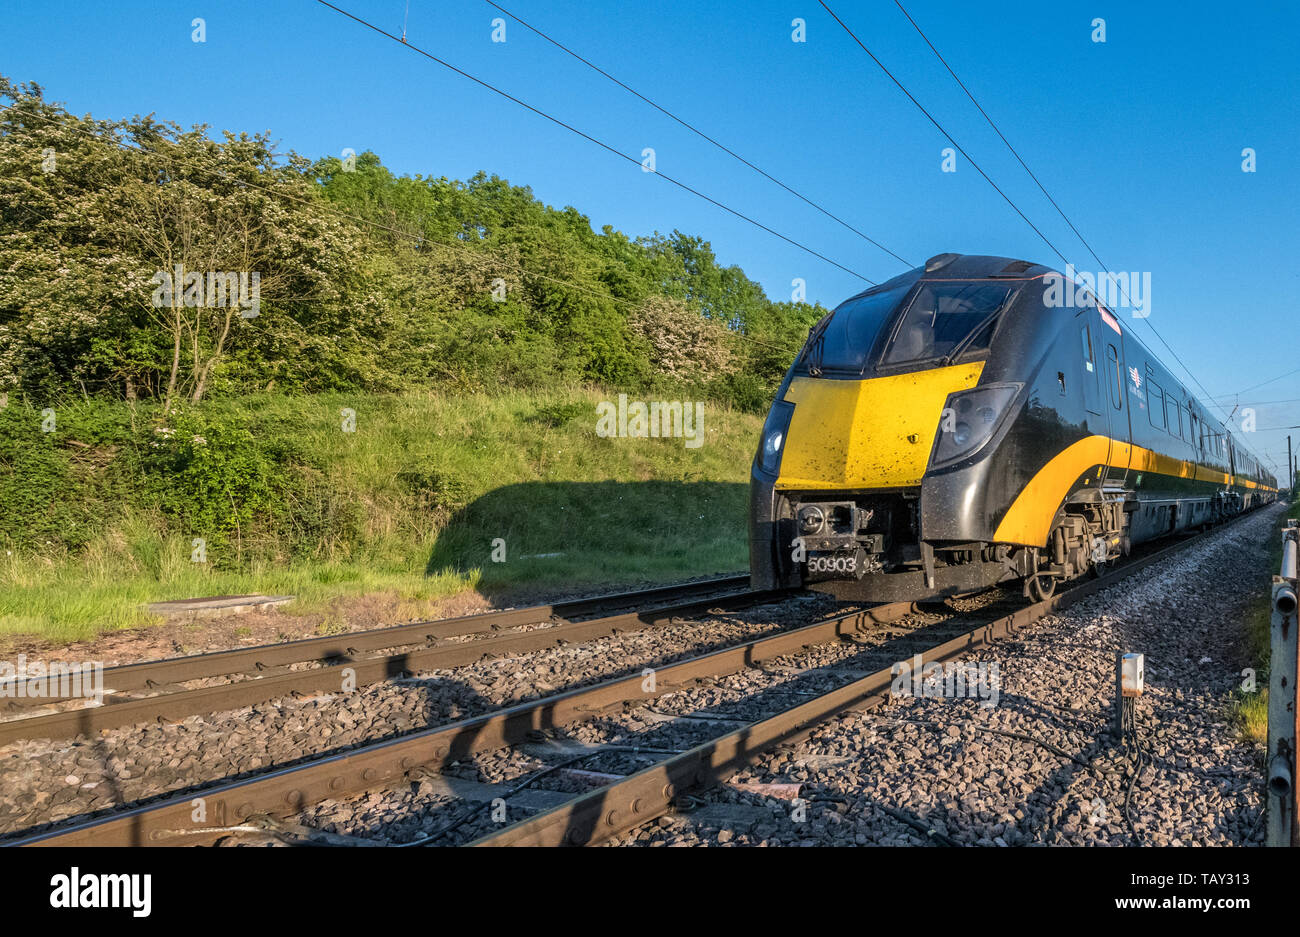 Class 180/1 diesel electric train operating on the East Coast Mainline by Grand Central Railway. Stock Photo